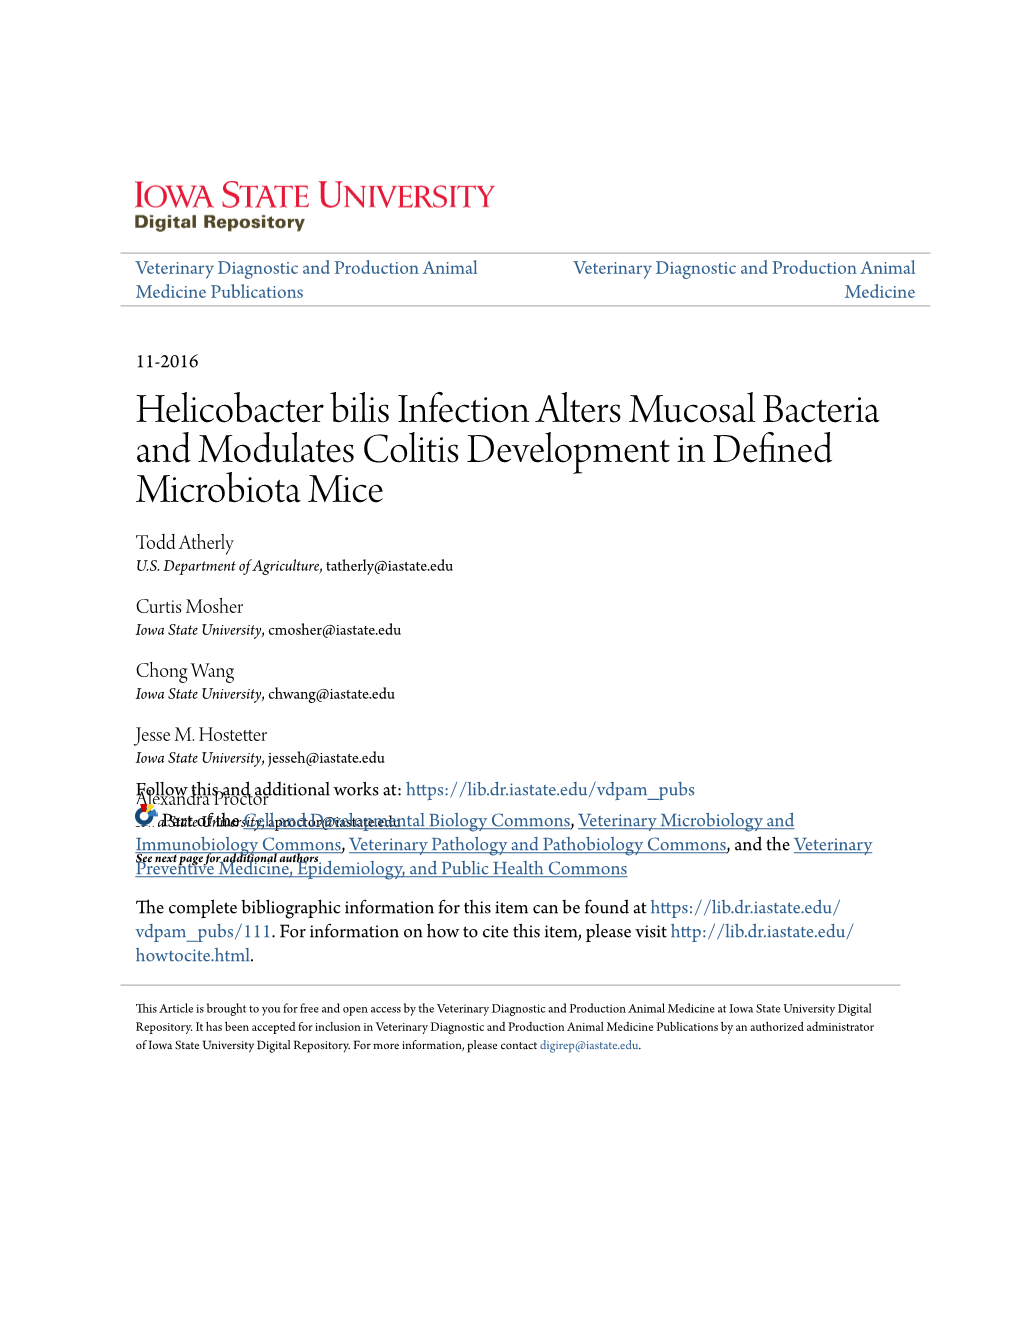 Helicobacter Bilis Infection Alters Mucosal Bacteria and Modulates Colitis Development in Defined Microbiota Mice Todd Atherly U.S